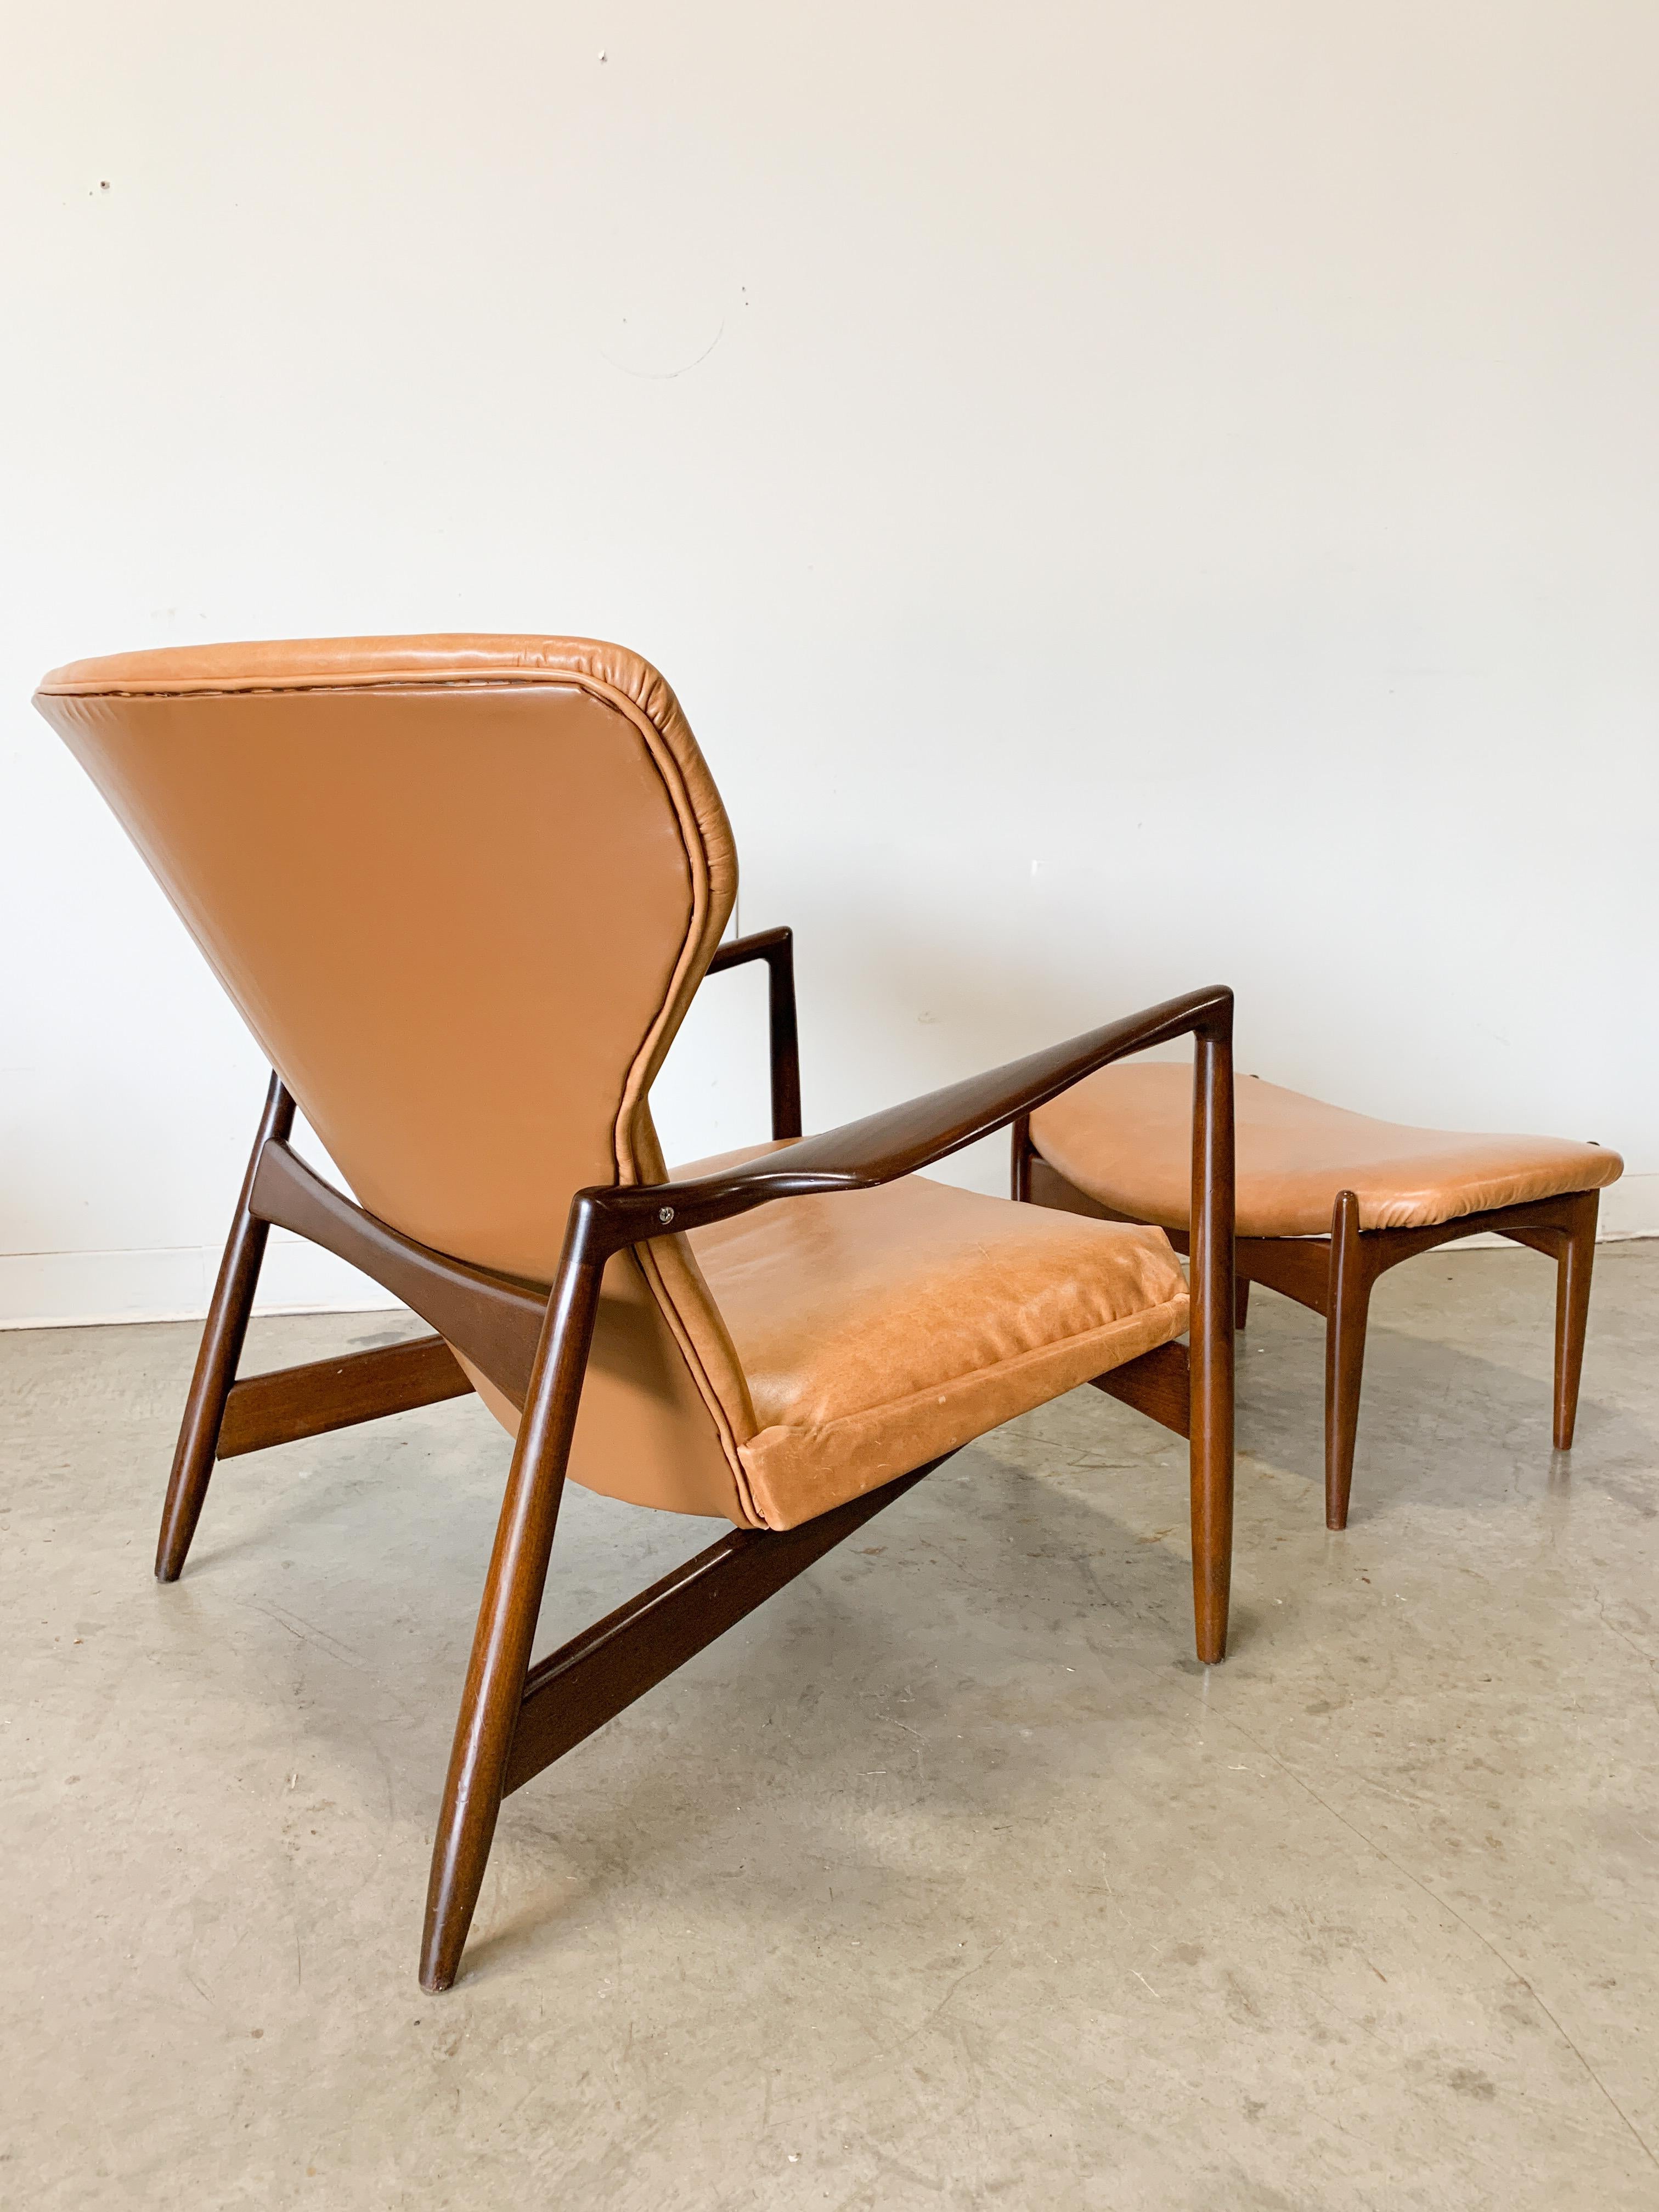 Striking Danish modern designs by Kofod Larsen for Selig. Beautifully sculpted frames of solid beech with a walnut tinted lacquer finish. New genuine leather upholstery and foam provide a very comfortable seat with excellent back support. This chair